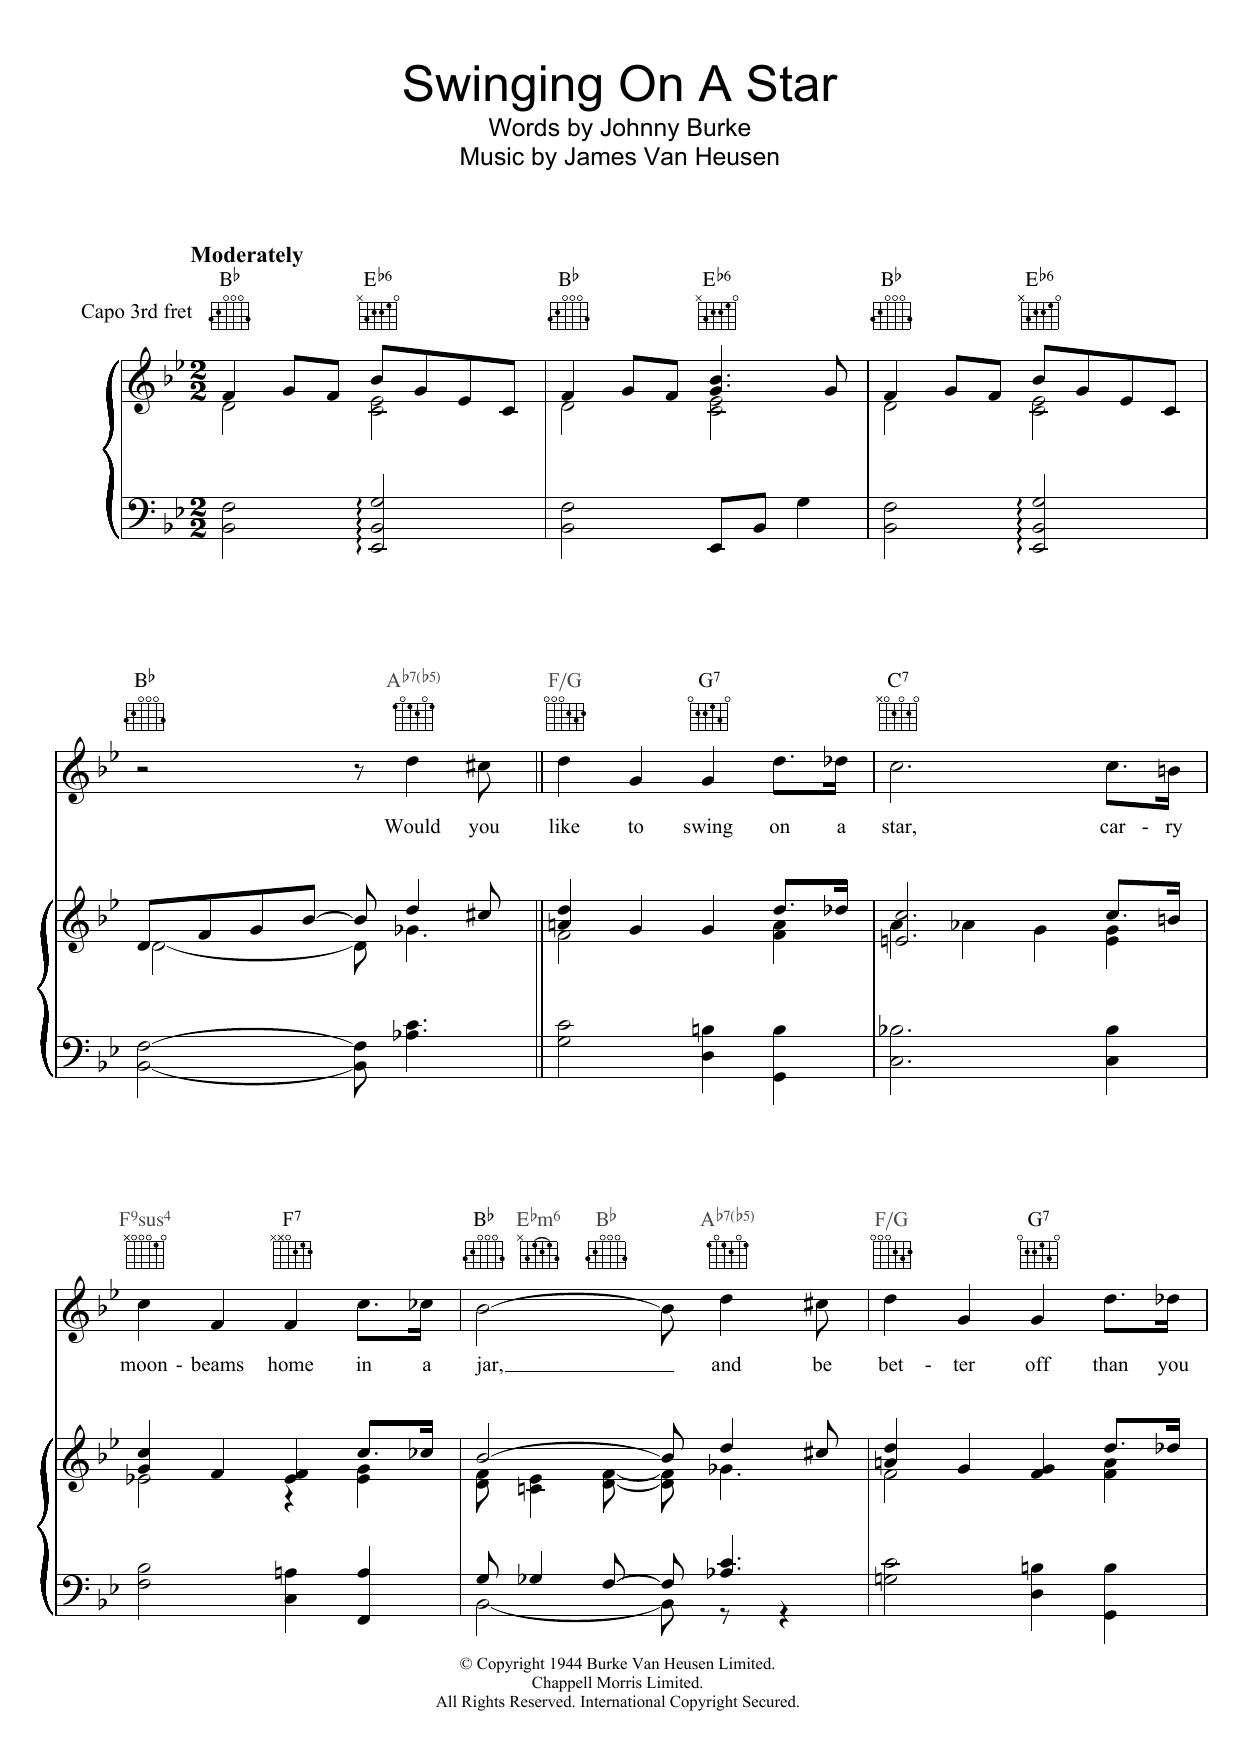 Johnny Burke Swinging On A Star sheet music notes and chords. Download Printable PDF.